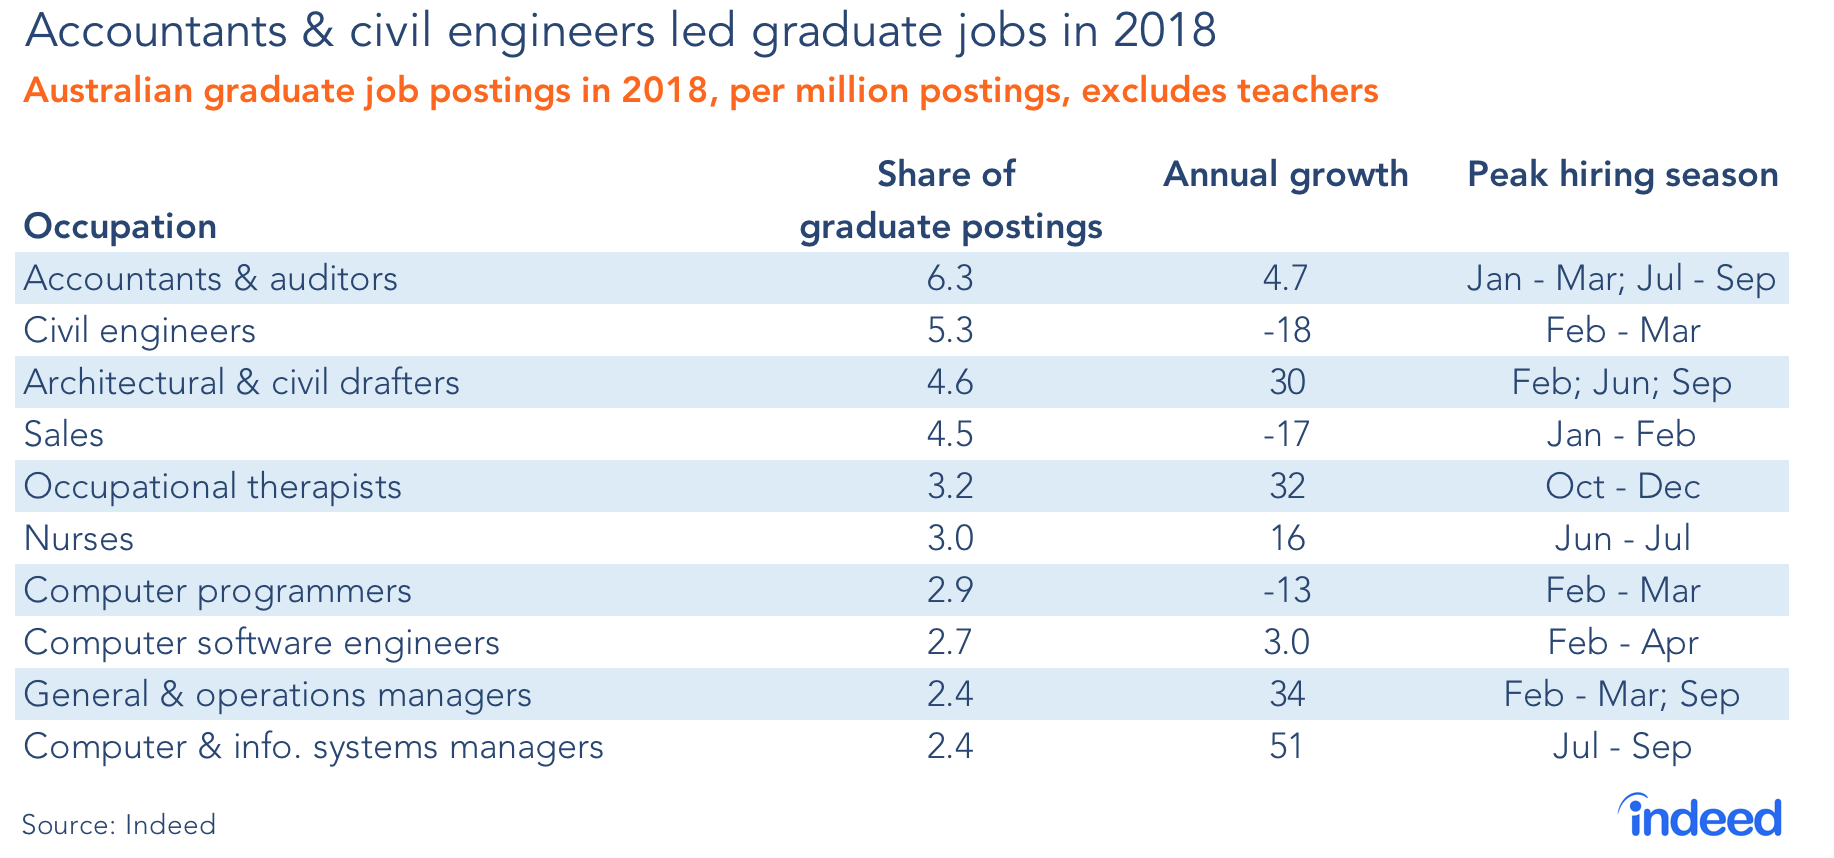 Accountants and civil engineers led graduate jobs in 2018